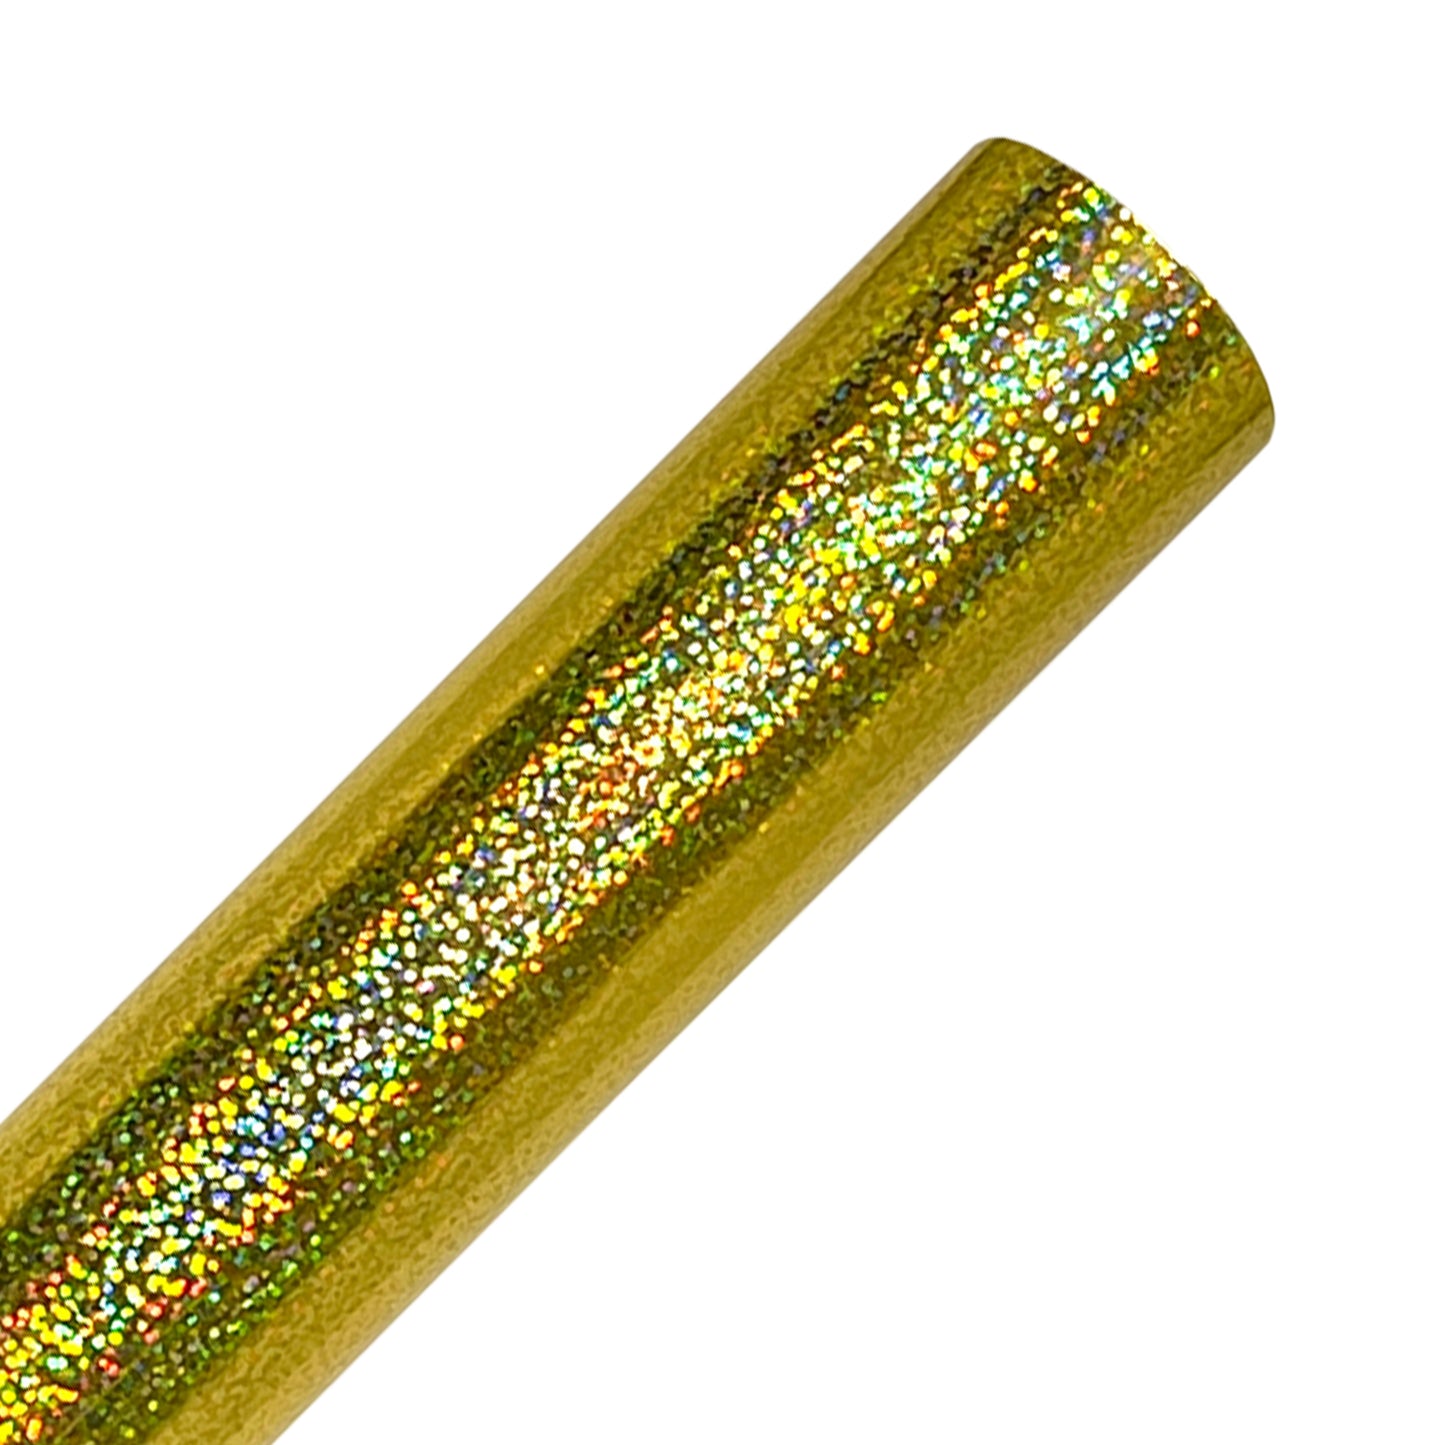 Gold Holographic Sparkle Adhesive Vinyl Sheets By Craftables